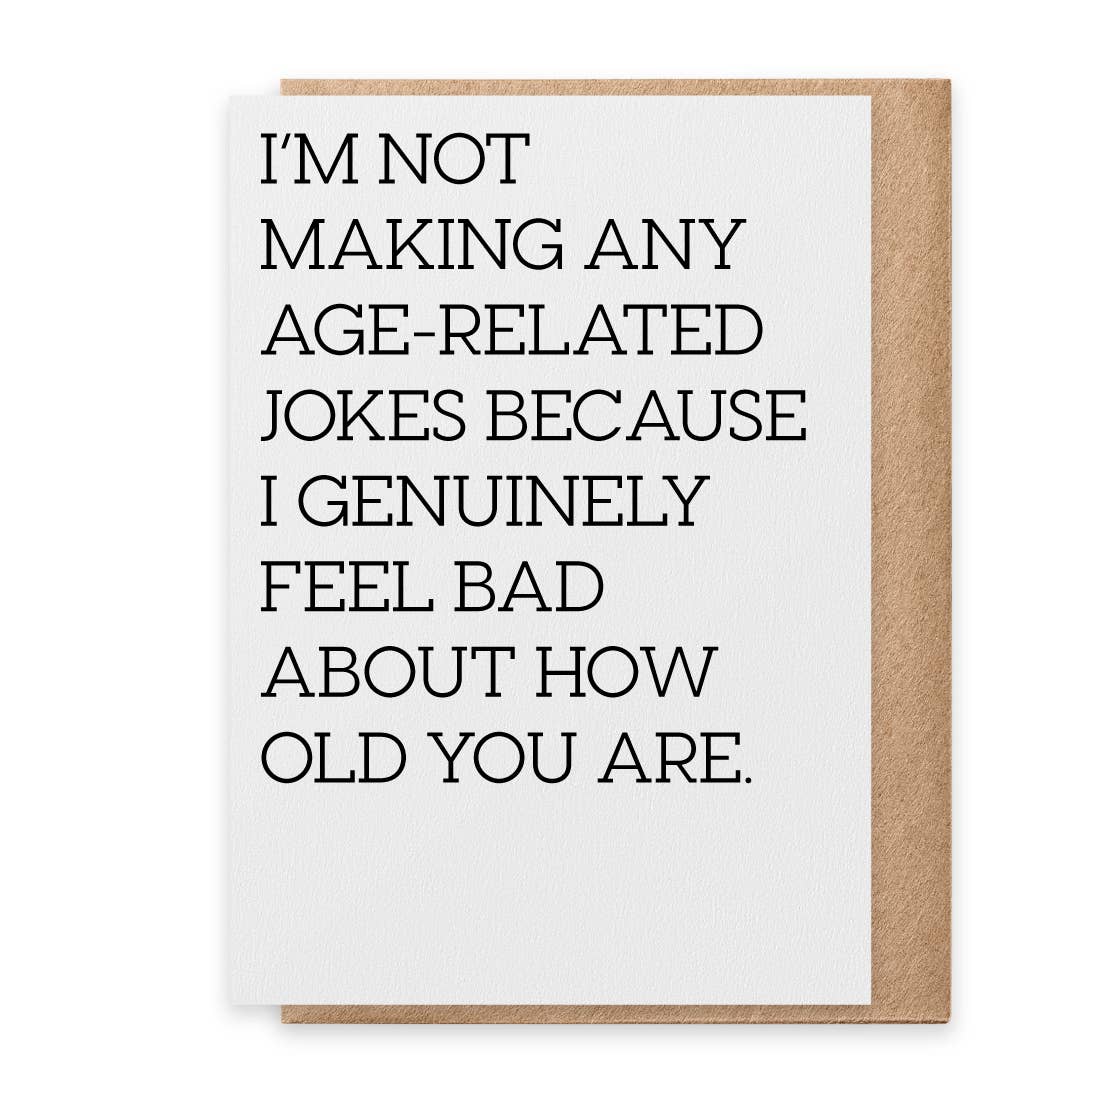 PSPR - Greeting Card - Age-Related Jokes